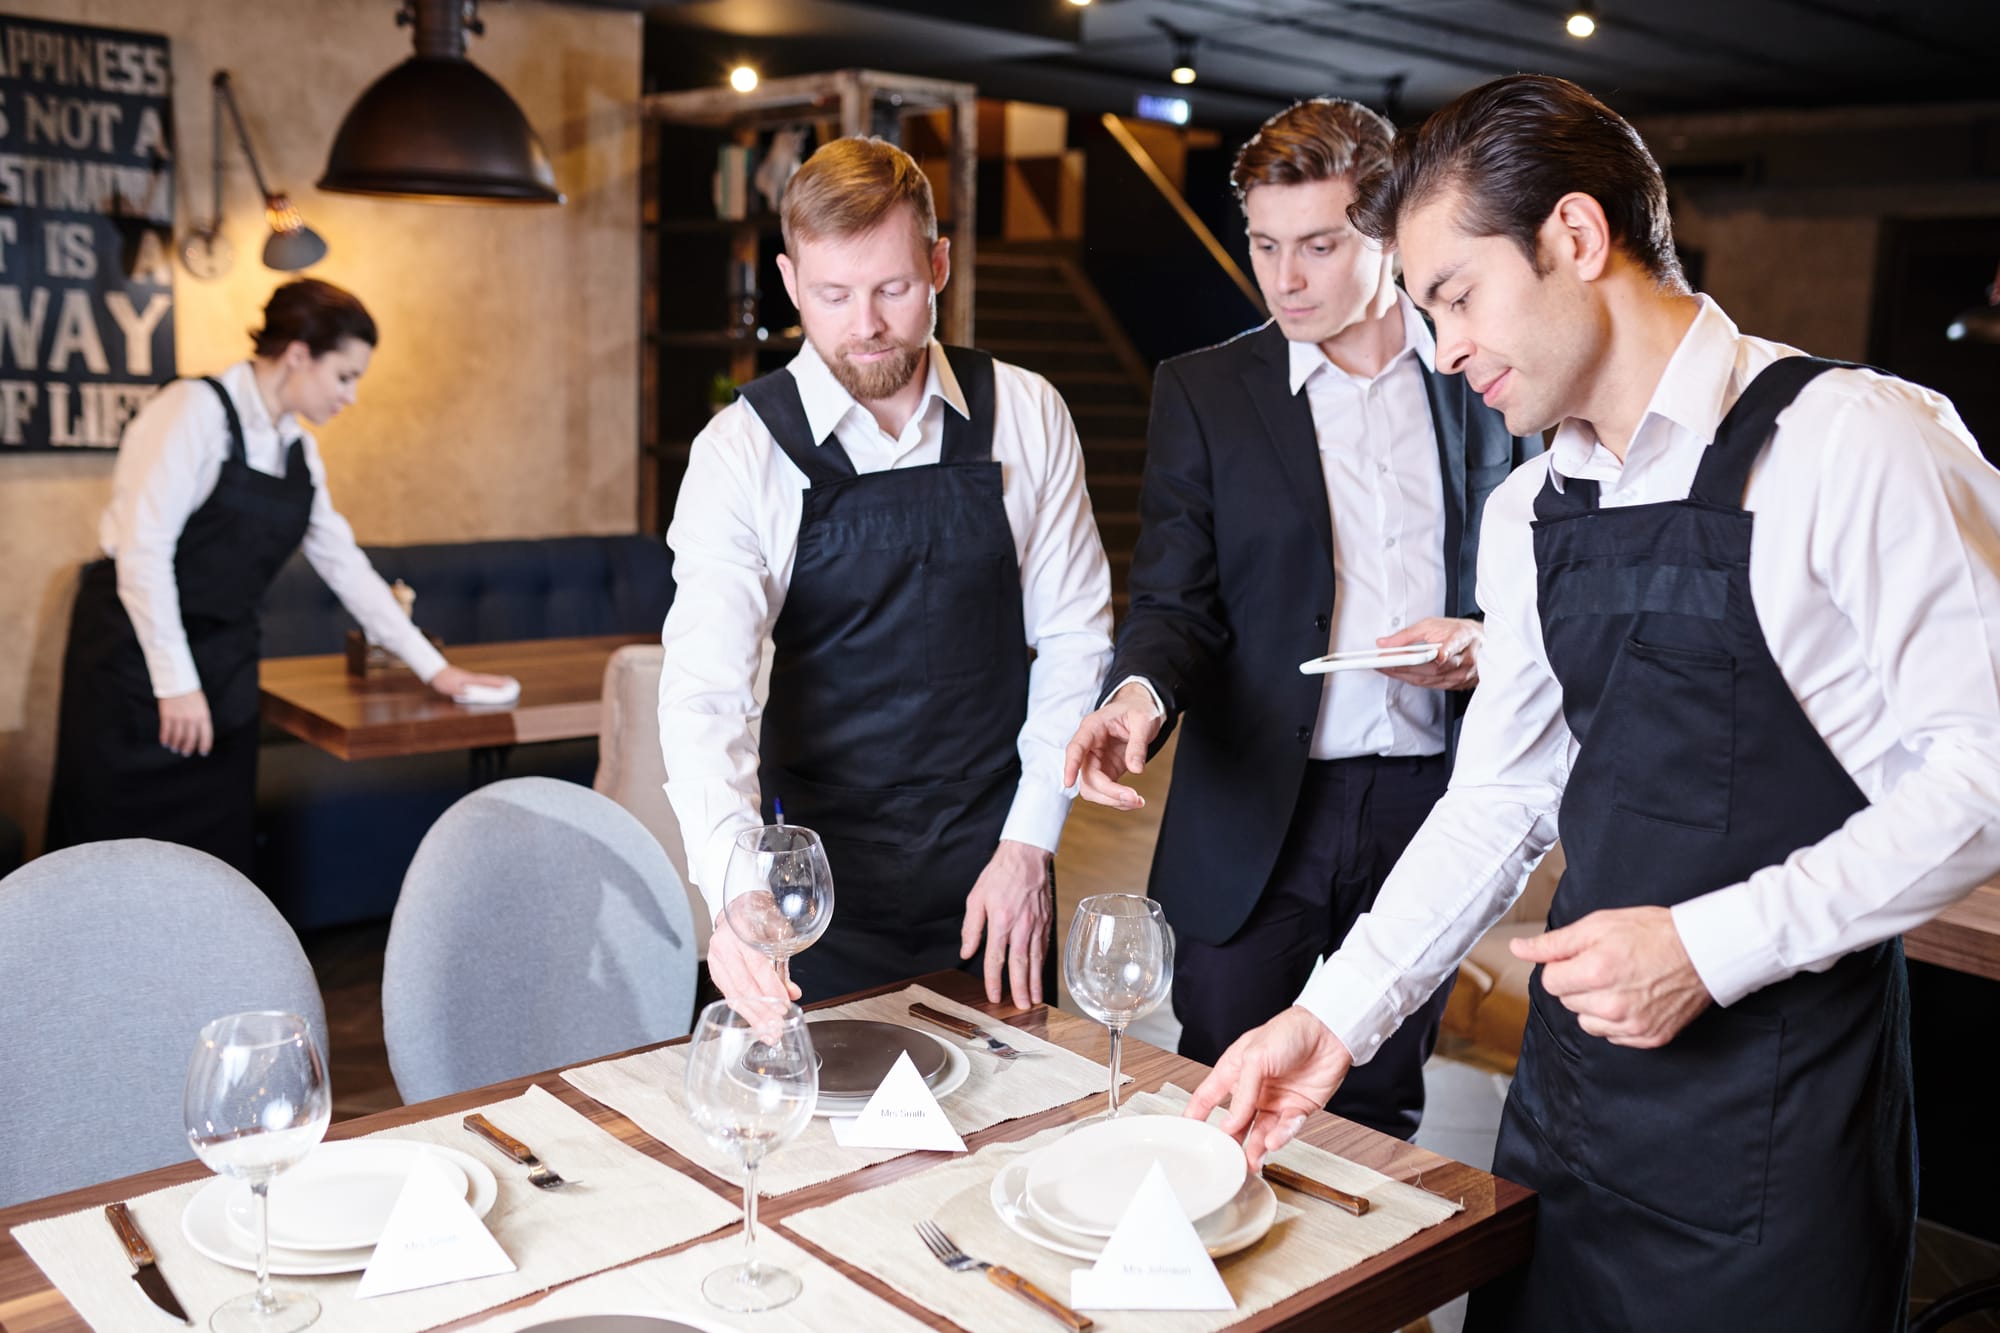 Restaurant staff setting a table.